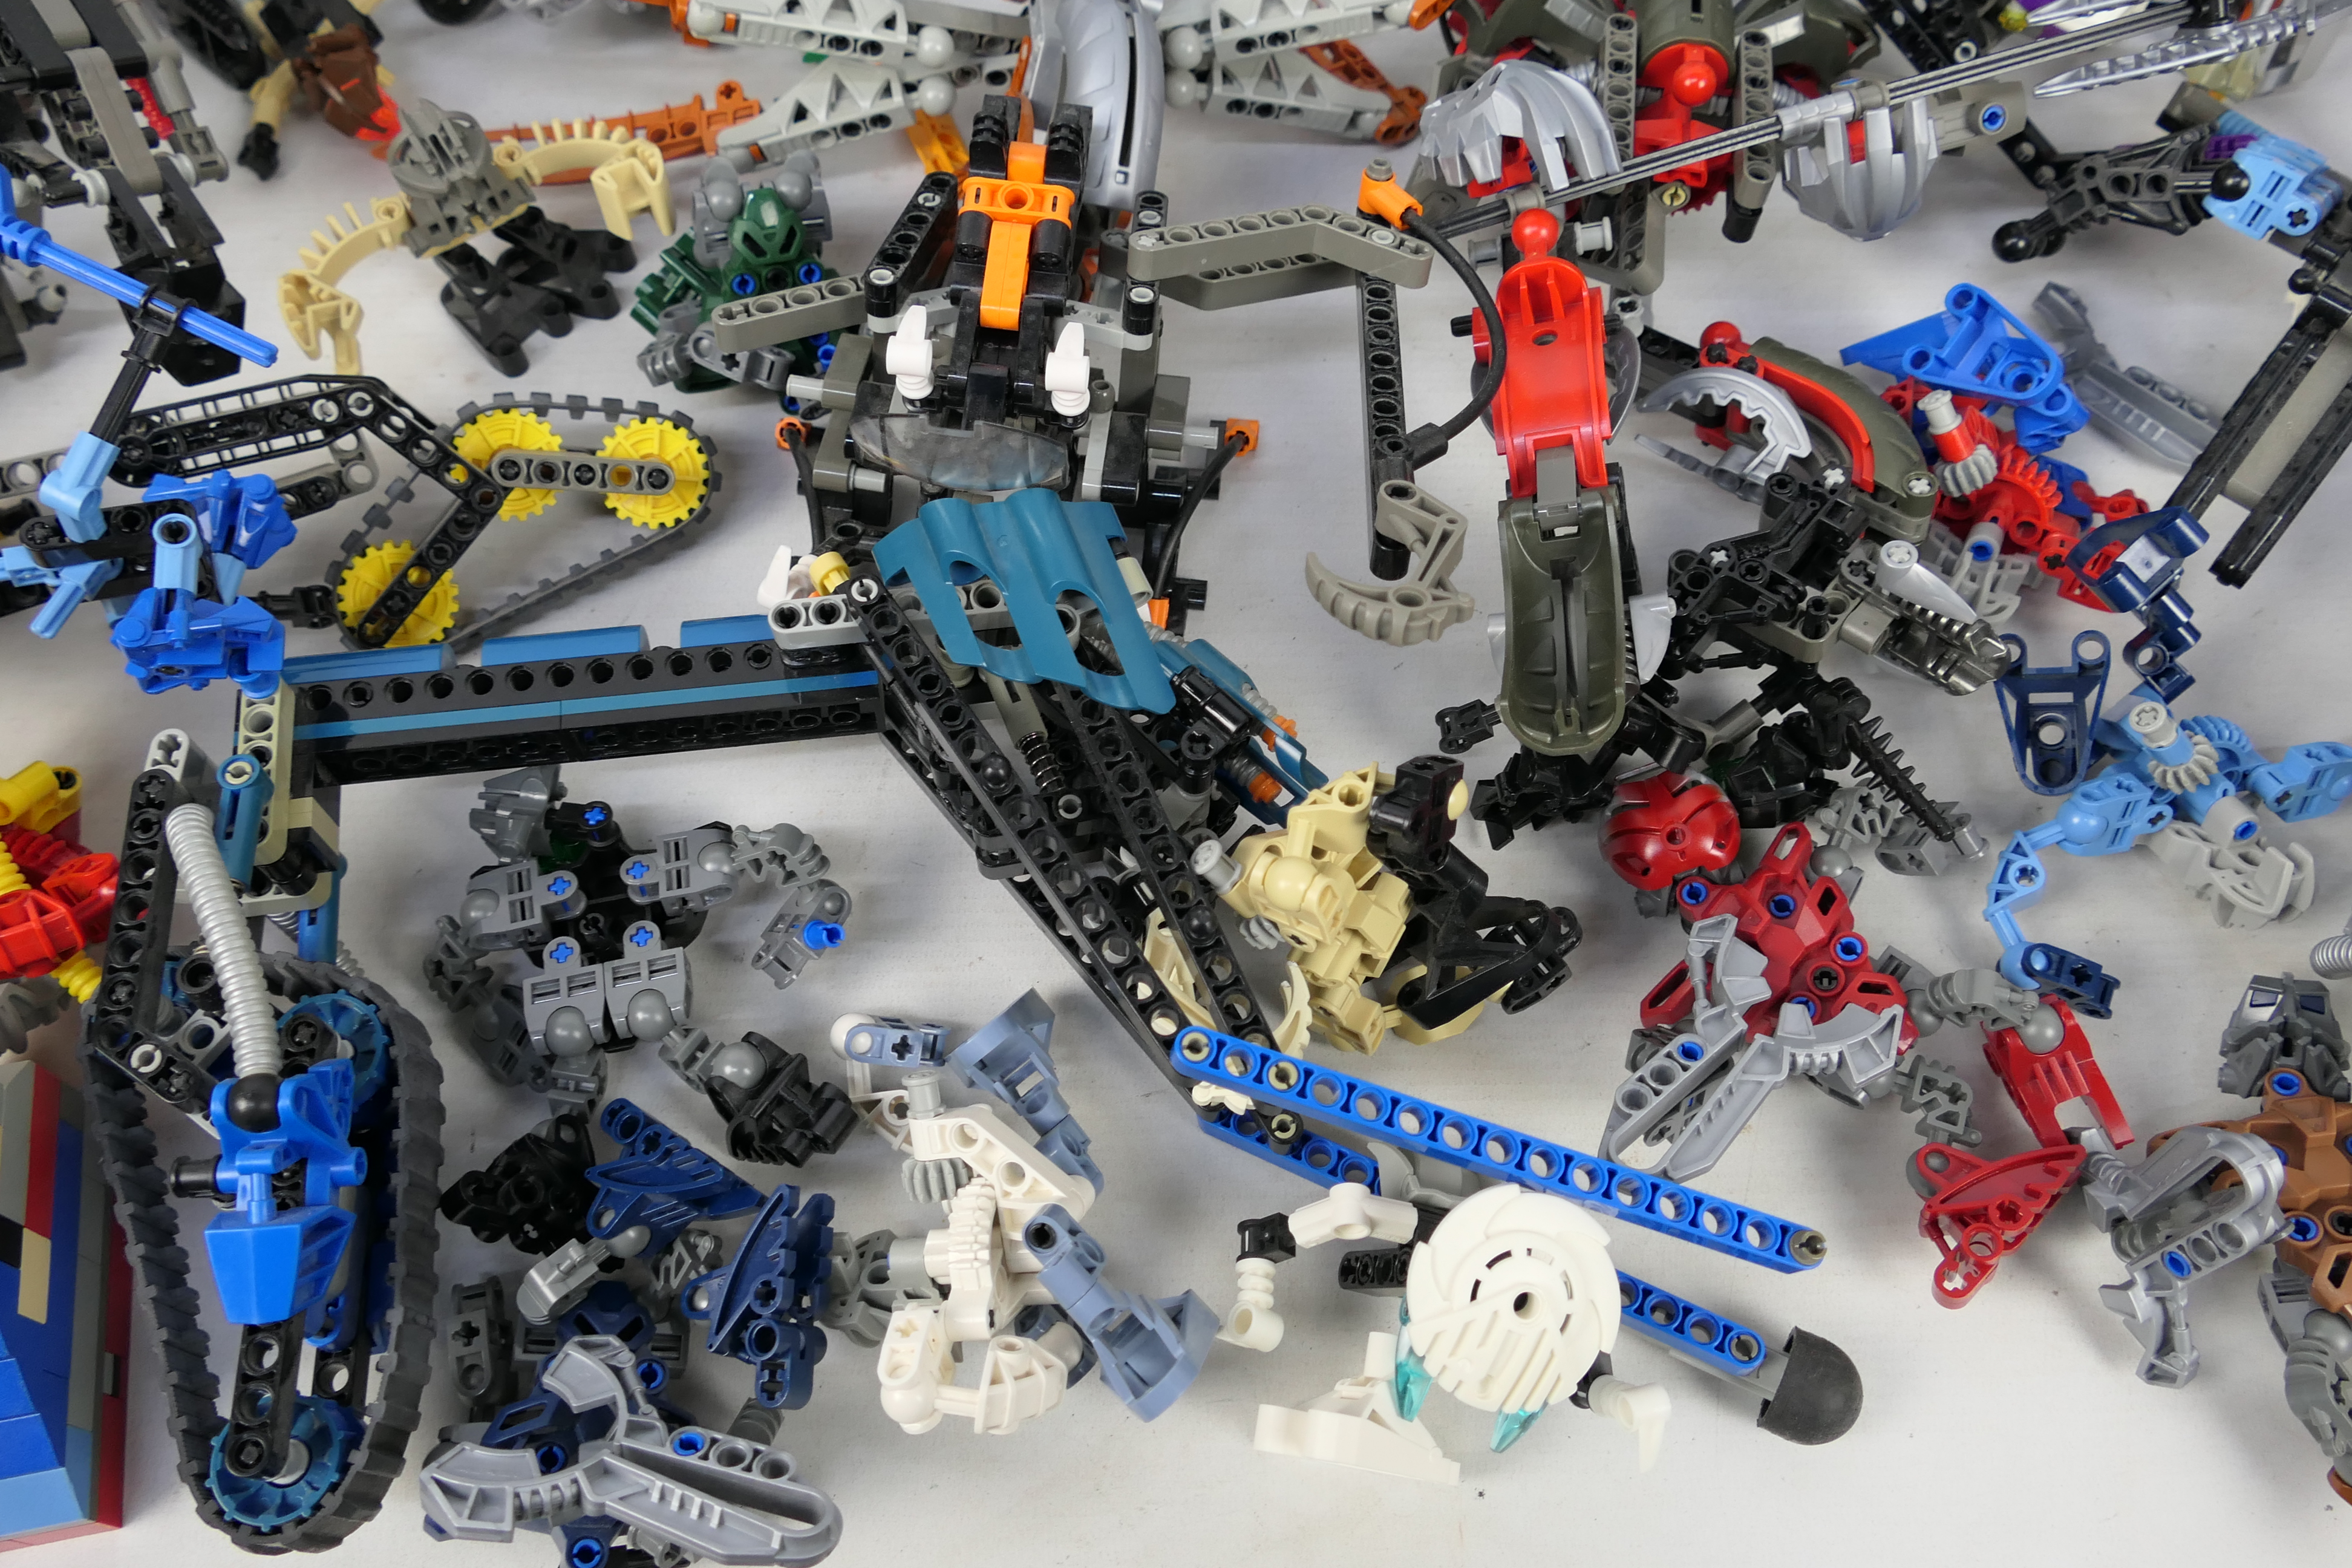 Lego - Bionicles - A collection of unboxed Lego including 15 x large Bionicle figures, - Image 6 of 7